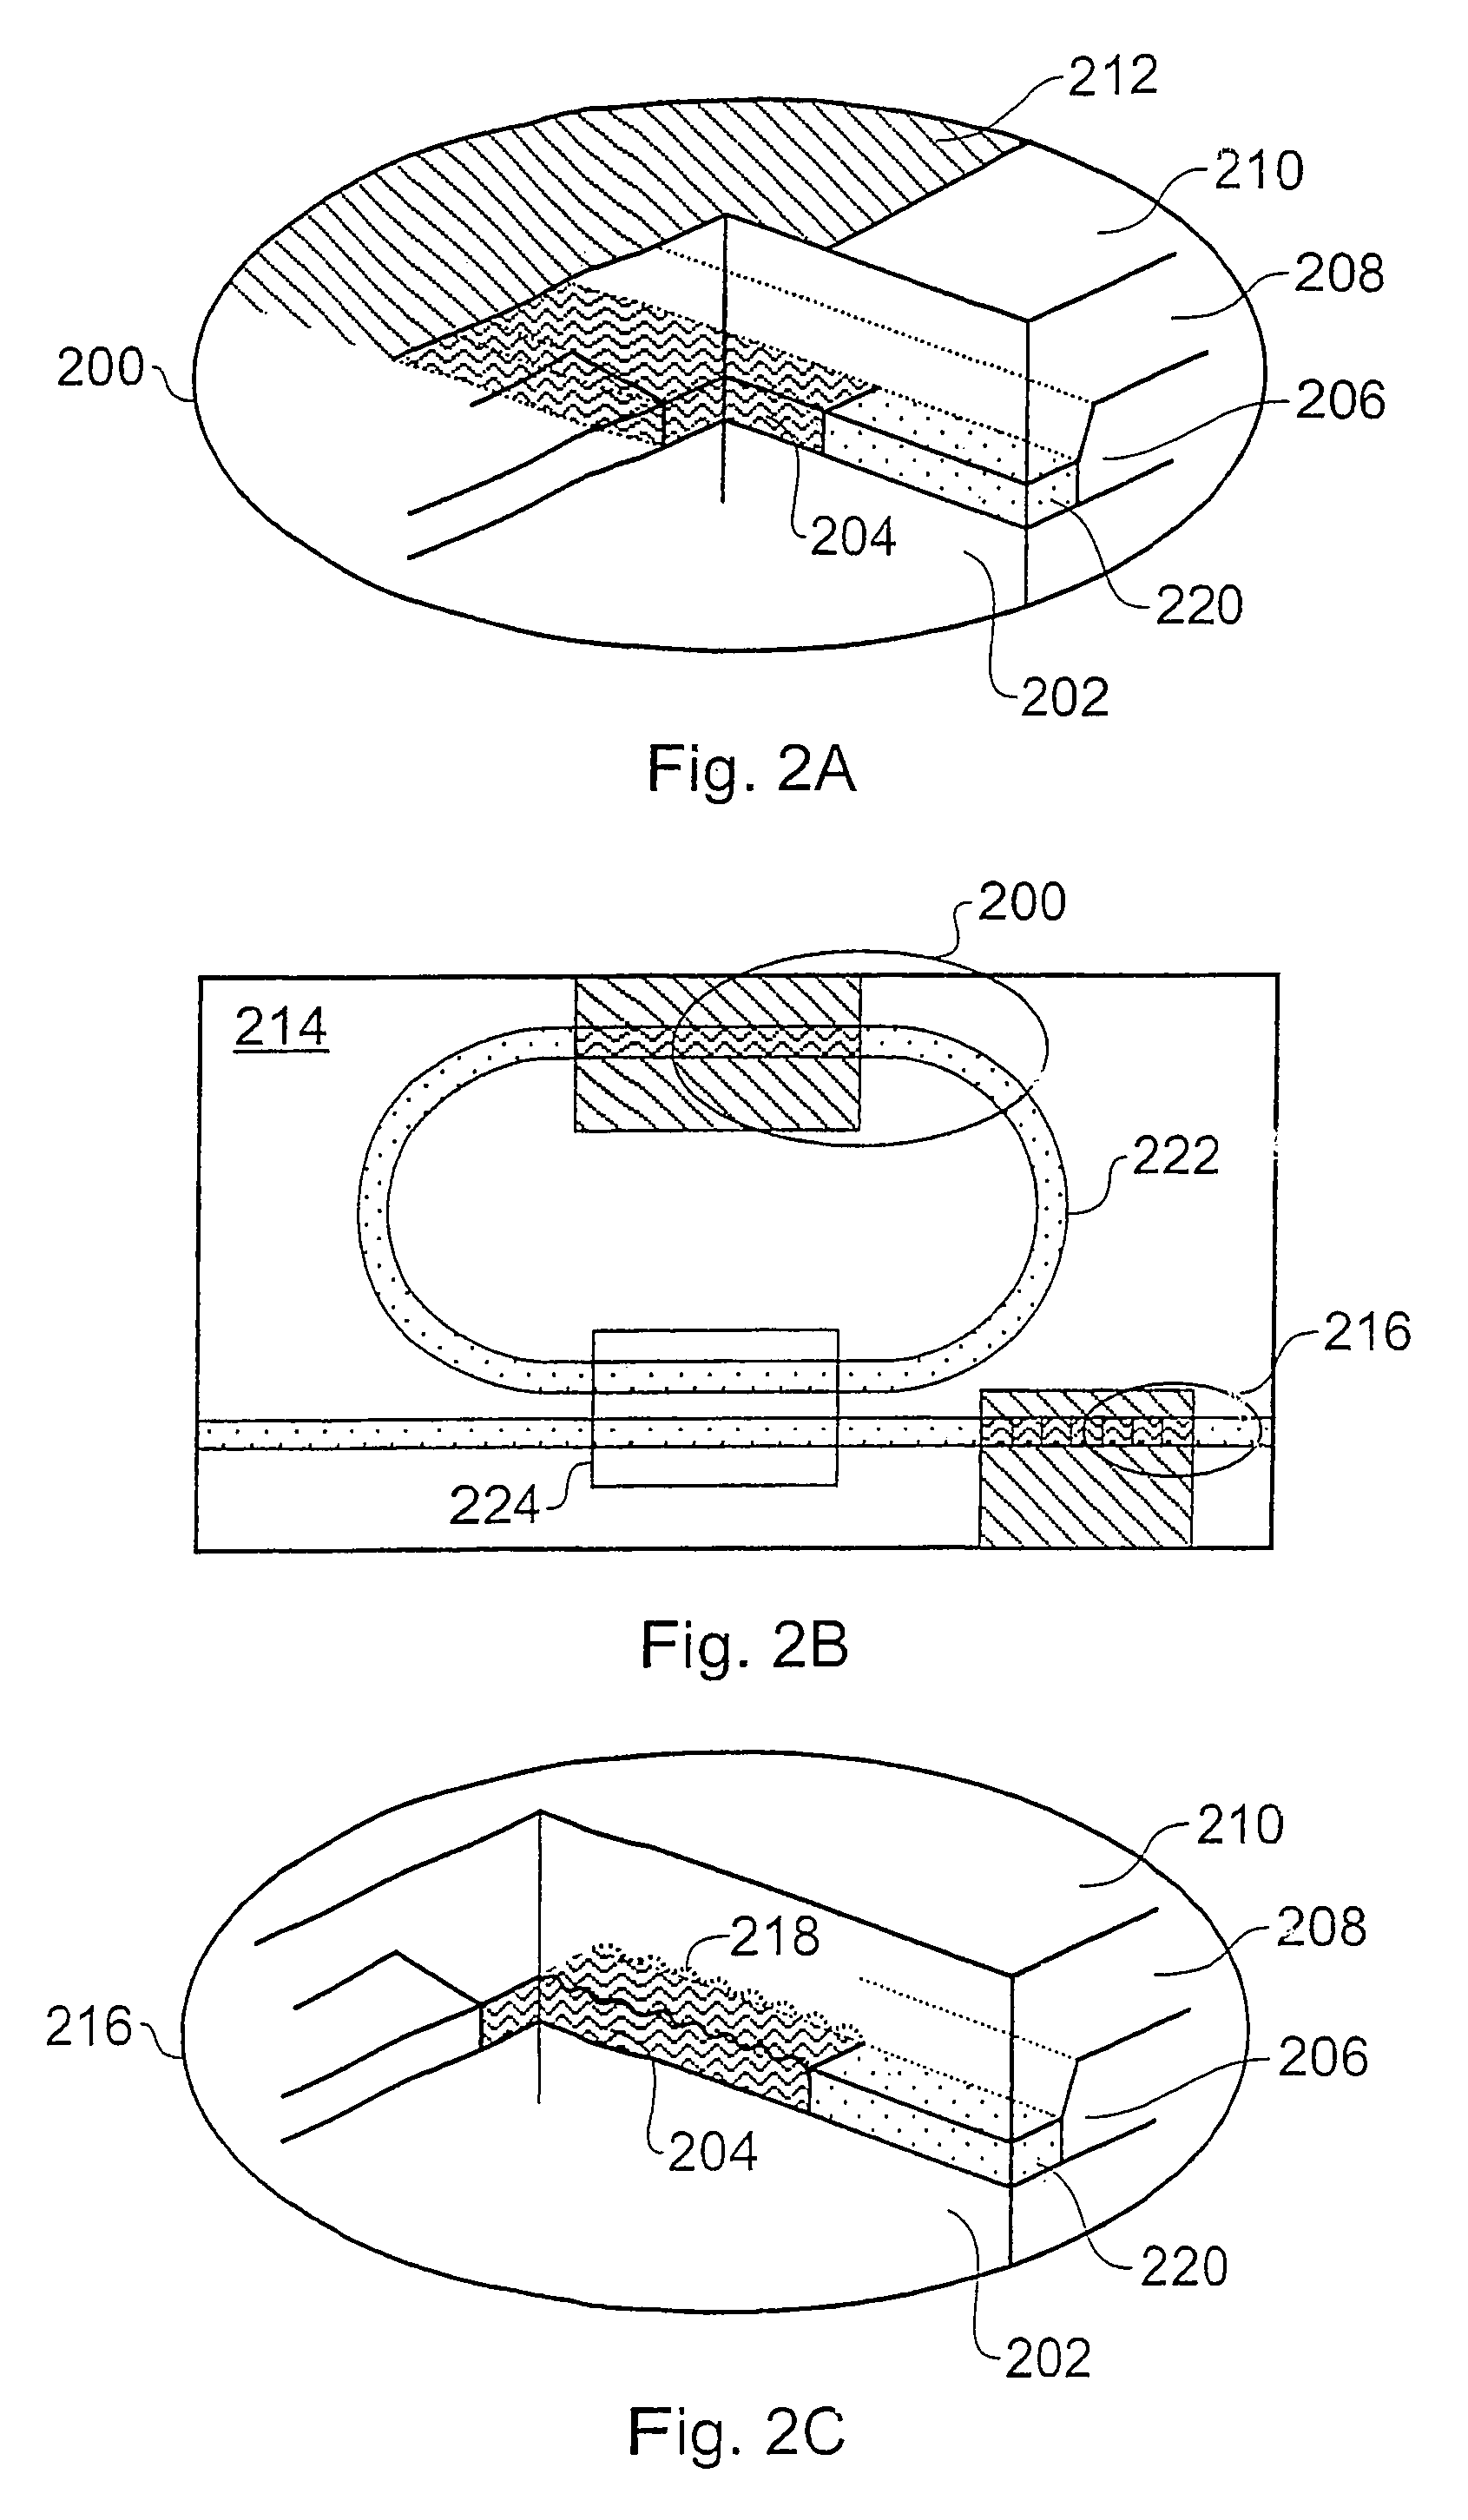 Tunable ring laser with external grating operation in a single mode